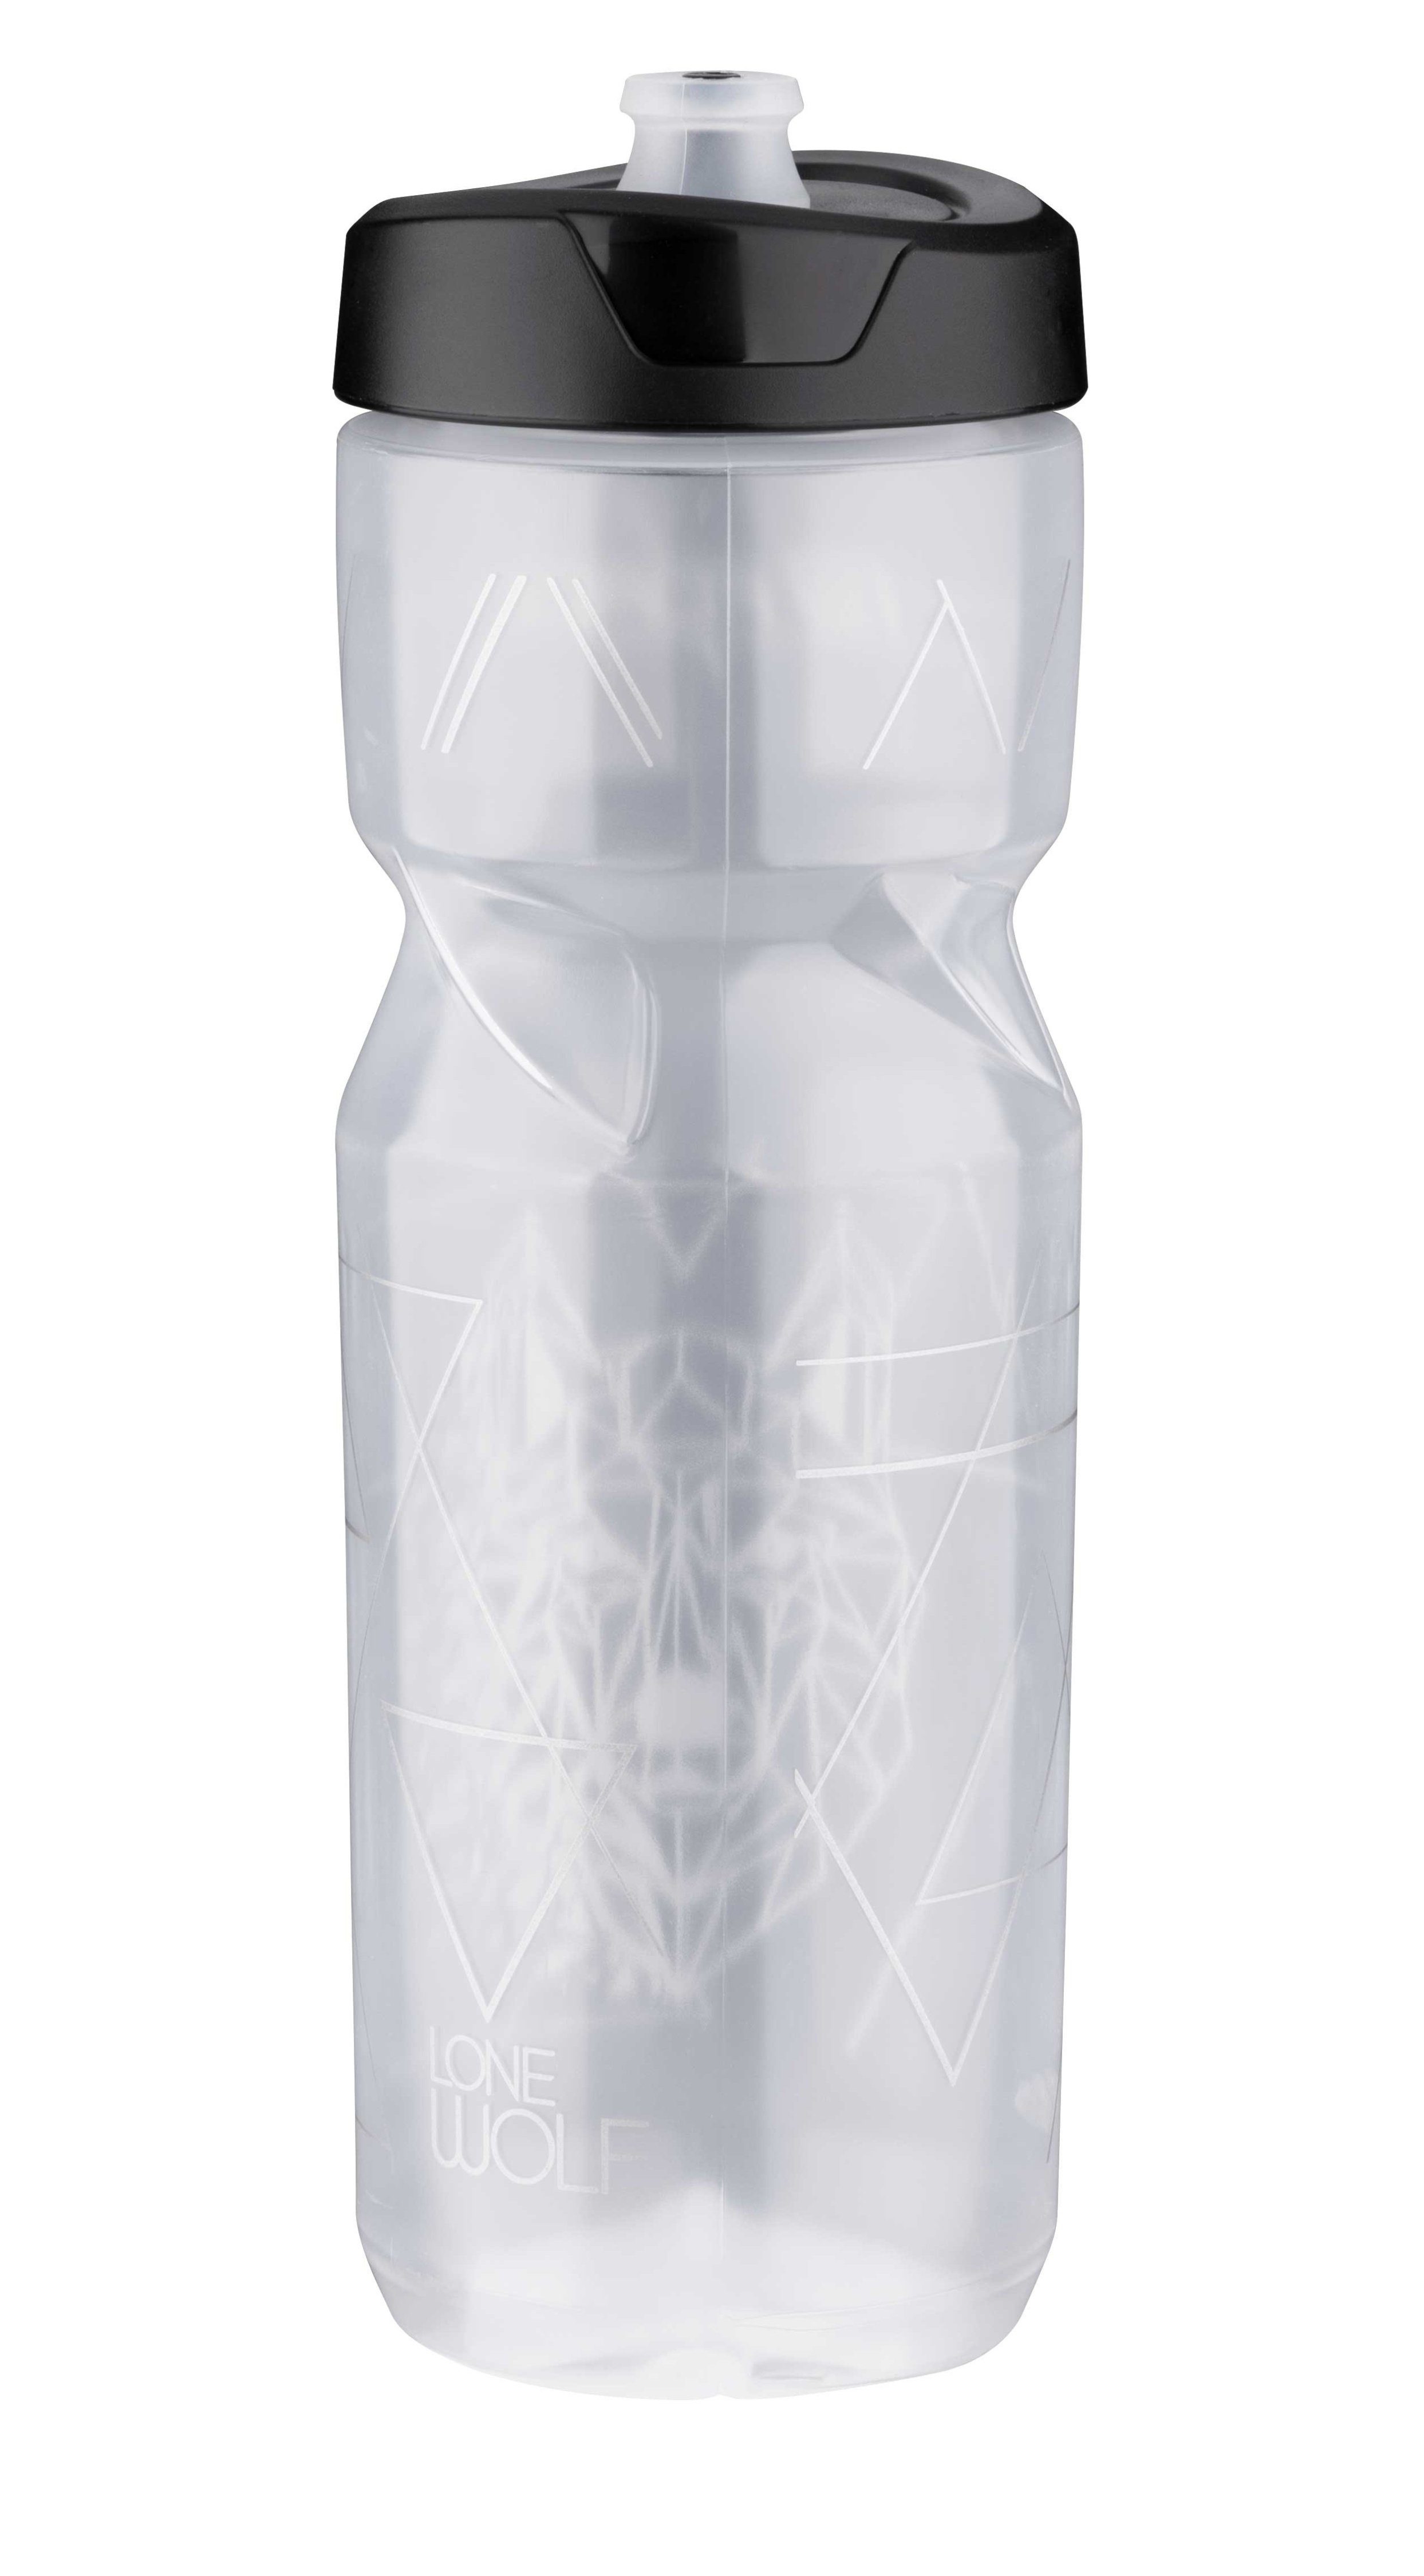 FORCE Flasche l 0,8 FORCE Trinkflasche silbrig-transparent WOLF LONE